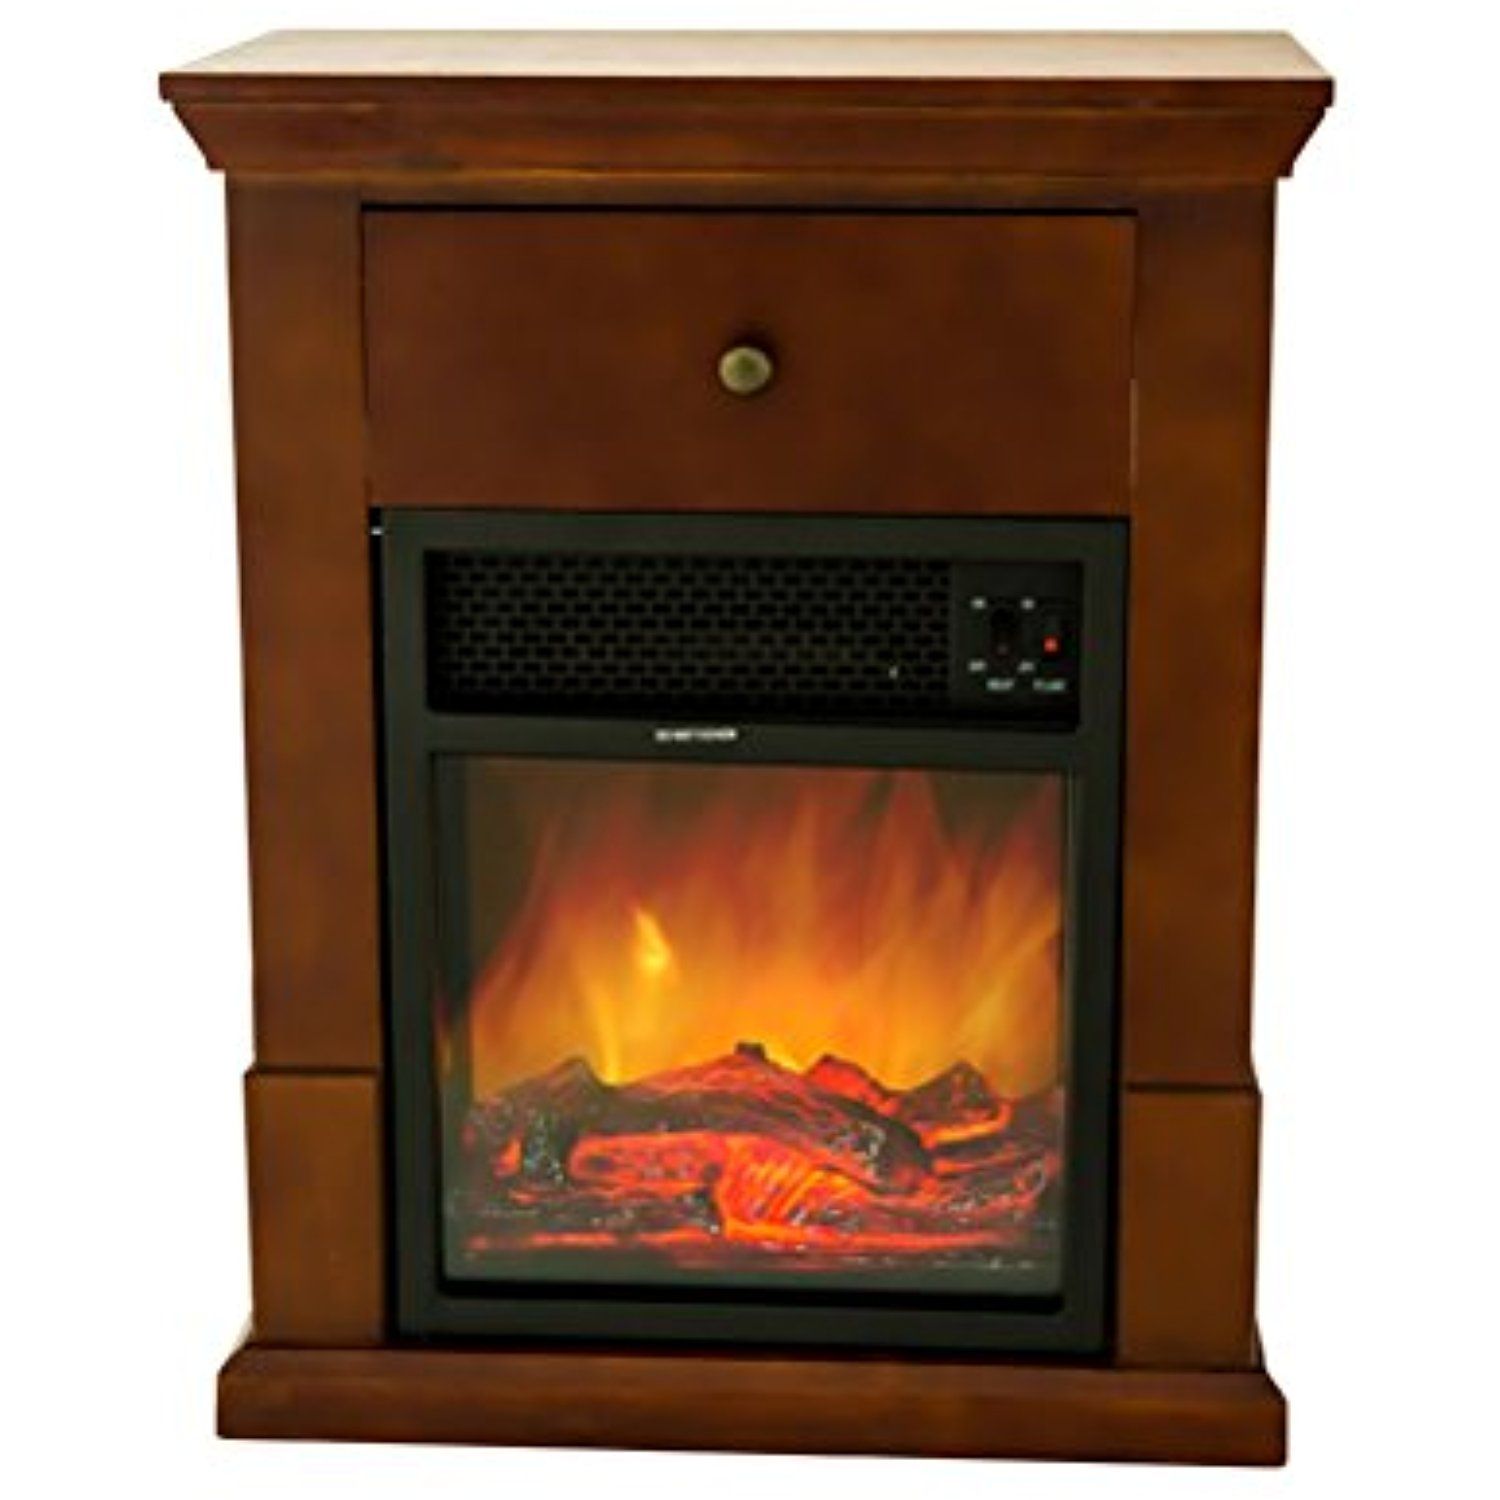 Duraflame Fireplace Lovely Duraflame Freestanding Infrared Quartz Fireplace Stove